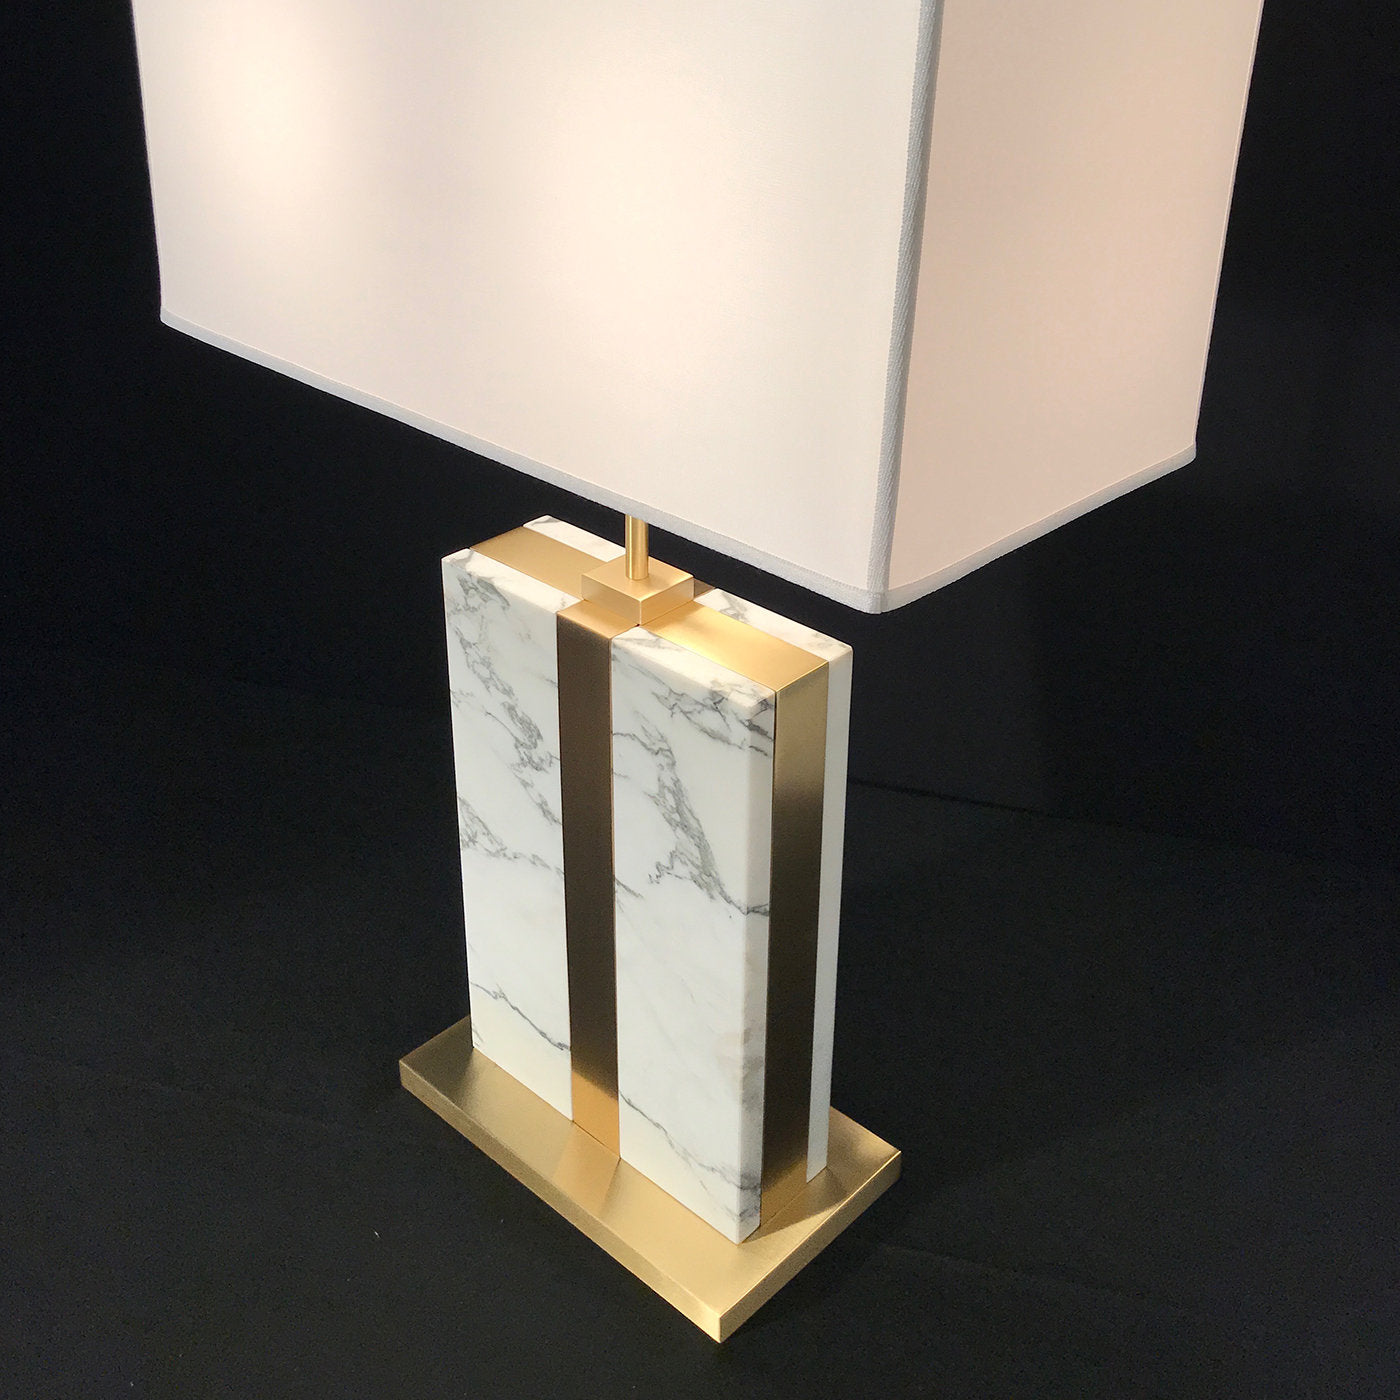 Brera Carrara Marble Table Lamp with Ivory Parchment Shade - Alternative view 2